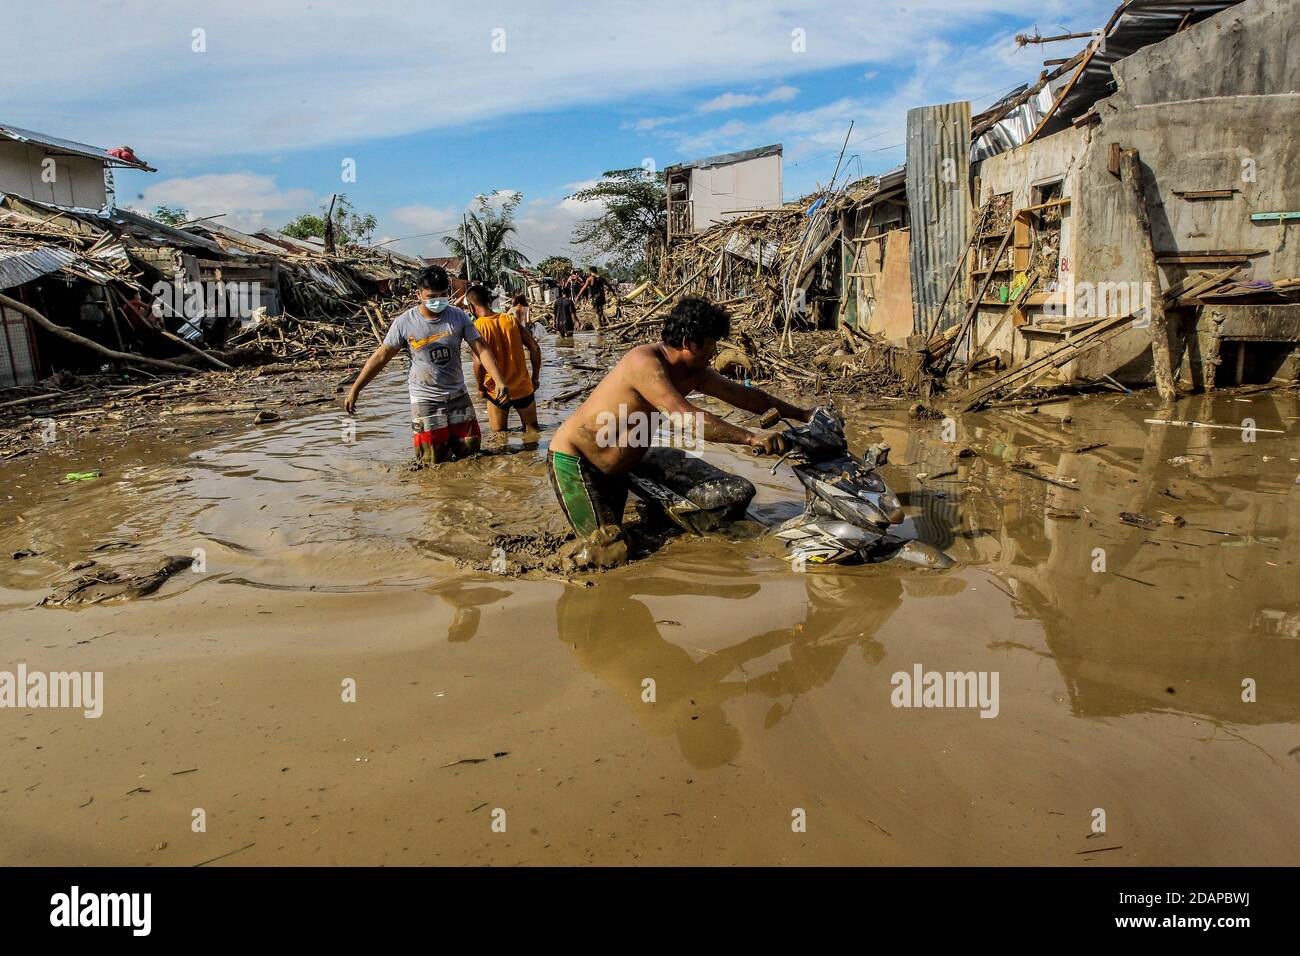 Rizal, Philippines. 14th Nov, 2020. Residents wade through knee-deep mud after the flood brought by Typhoon Vamco in Rizal Province, the Philippines, Nov. 14, 2020. Typhoon Vamco barrelled through the Philippines' main island of Luzon from Wednesday to Thursday, triggering flash floods and landslides in many regions and leaving at least 53 dead. Credit: Rouelle Umali/Xinhua/Alamy Live News Stock Photo